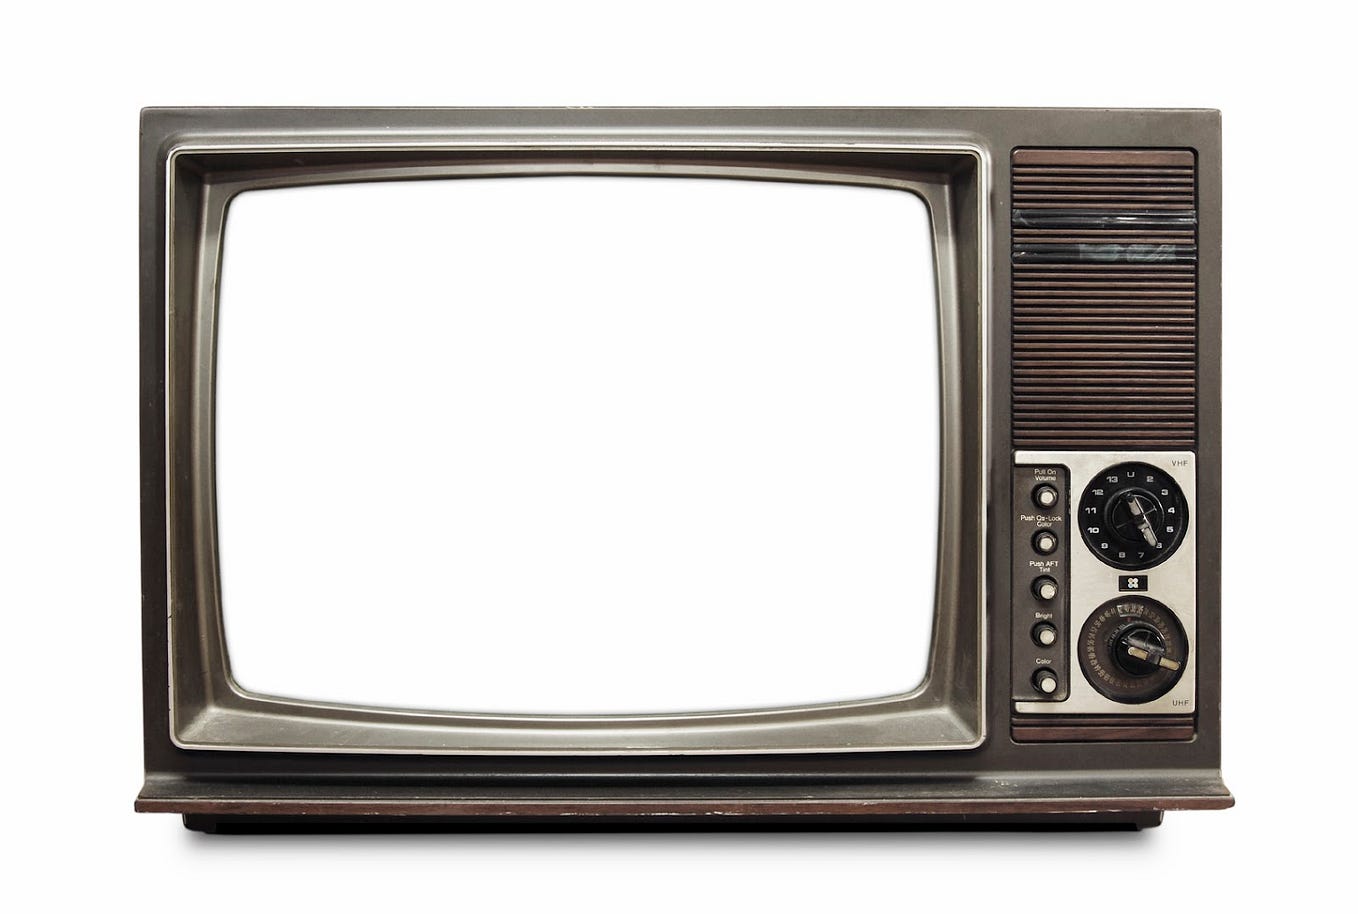 You Likely Have No Idea How TV Ratings Work — A Lot More People Are Watching Than You Think